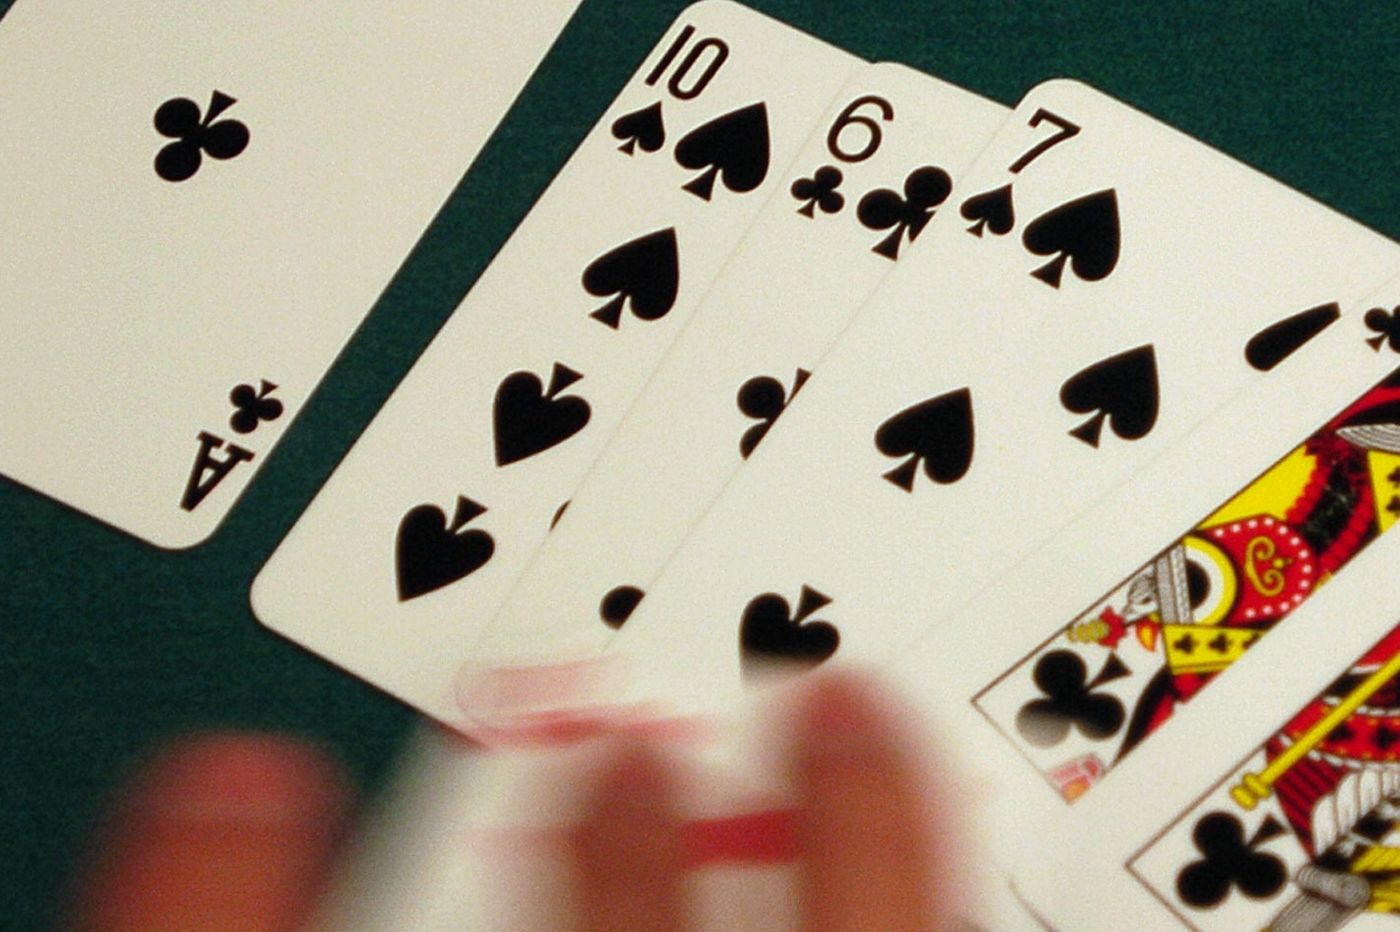 How to play online poker game?